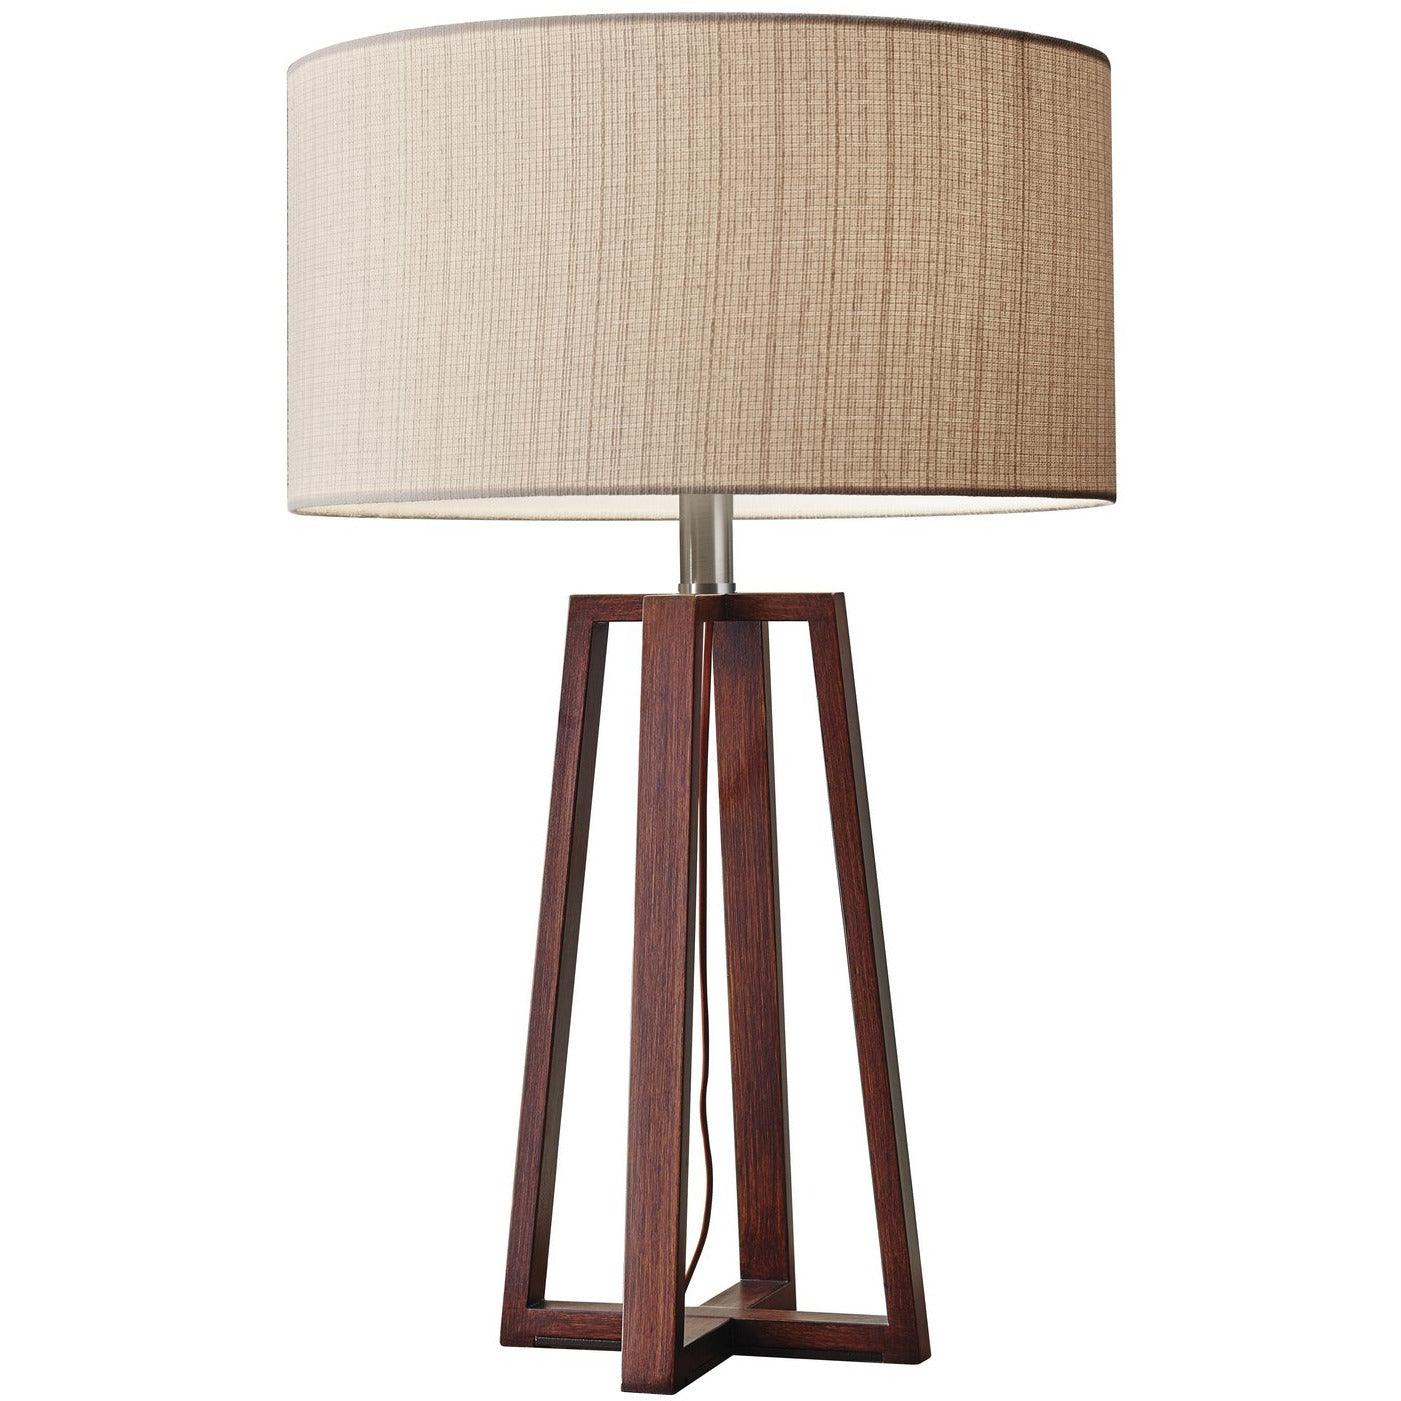 Adesso Home - Quinn Table Lamp - 1503-15 | Montreal Lighting & Hardware